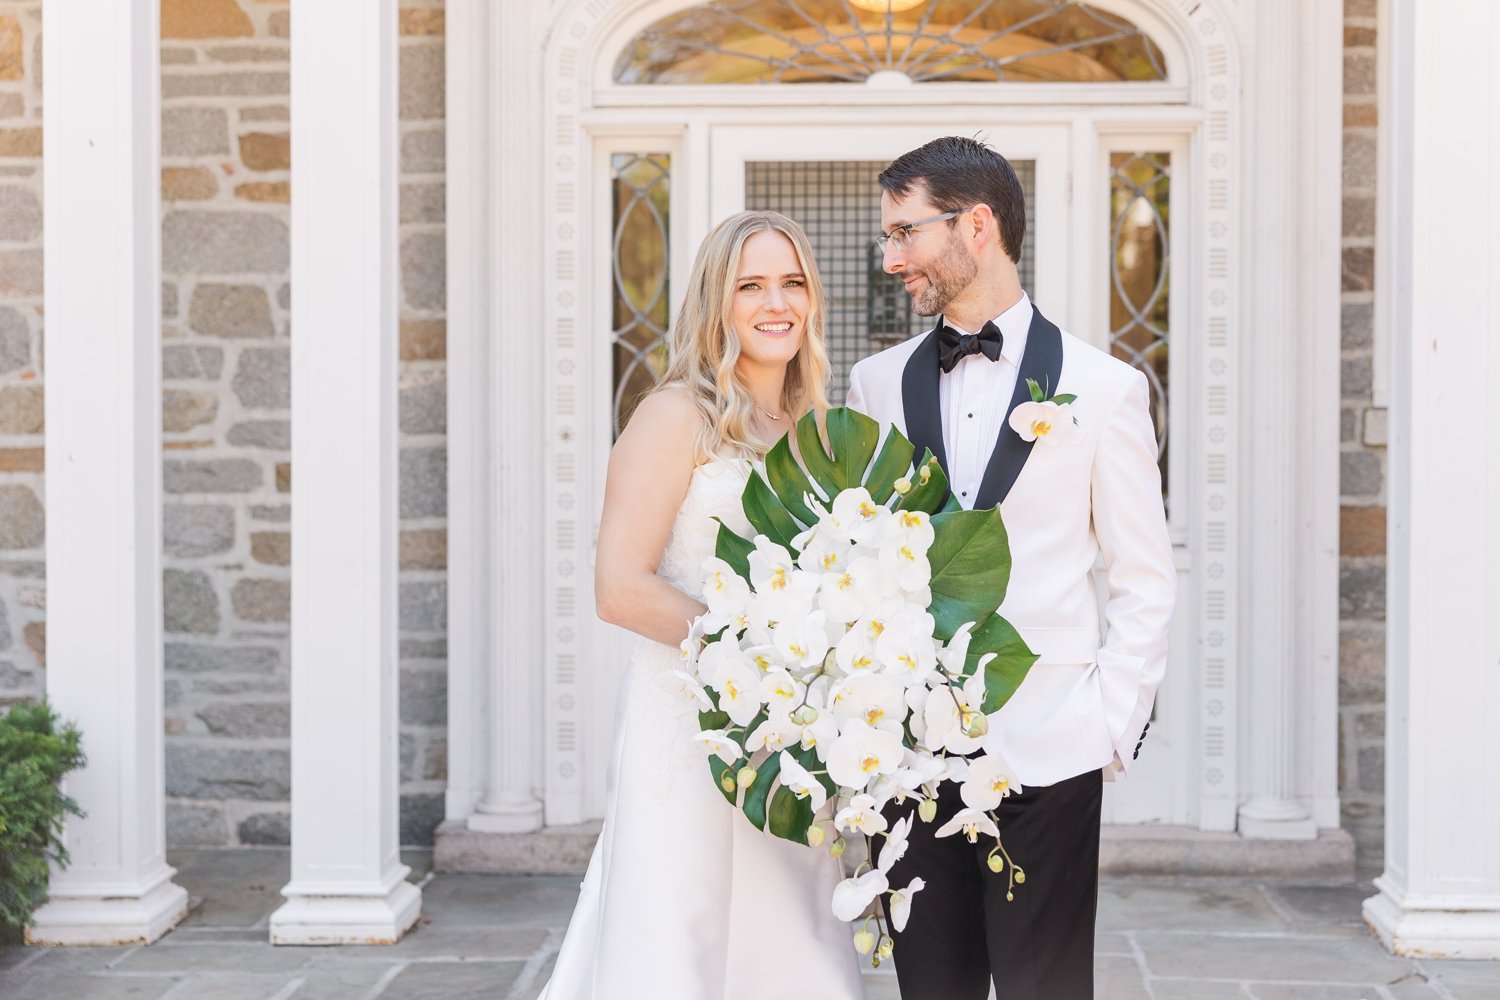 private-residence-hawaii-wedding-west-hartford-connecticut-photographer-shaina-lee-photography